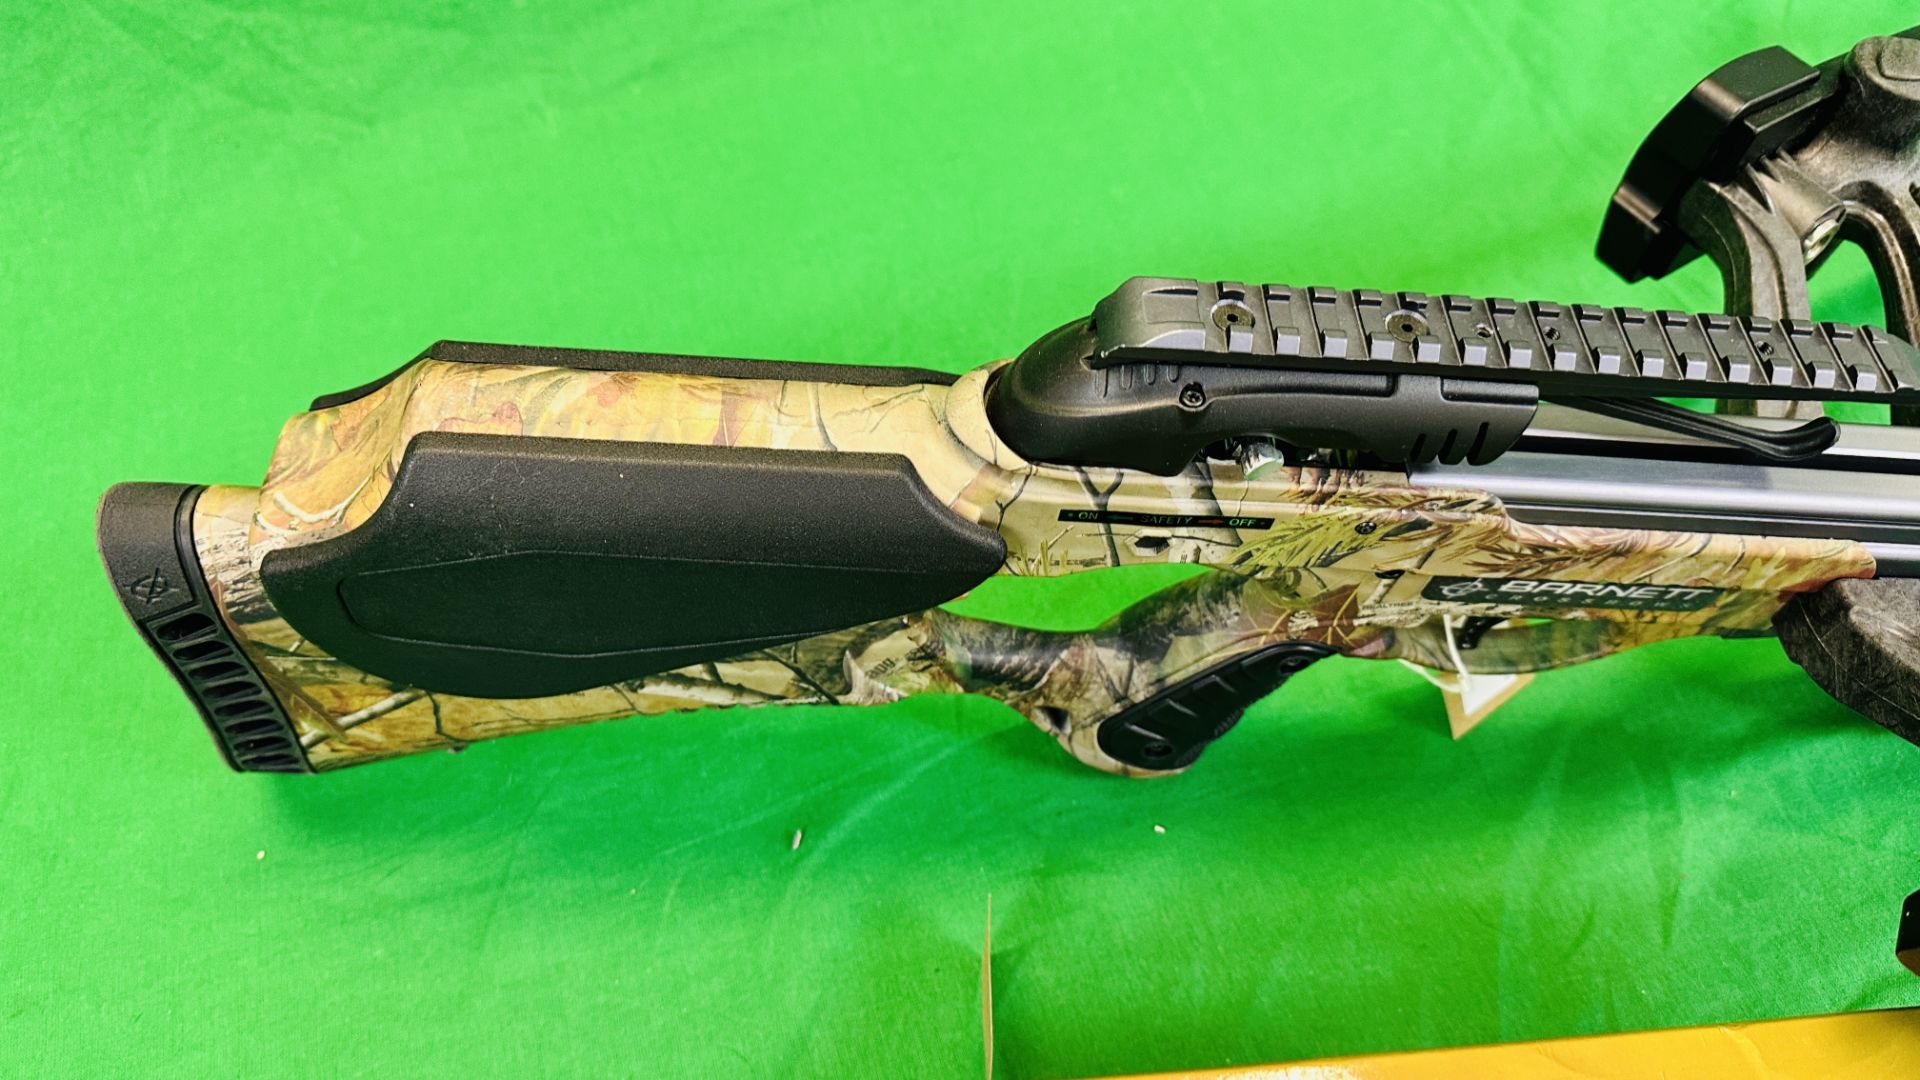 BARNETT "VENGANCE" COMPOUND CROSSBOW COMPLETE WITH THREE CARBON FIBRE CROSSBOW BOLTS, QUIVER, - Image 14 of 35